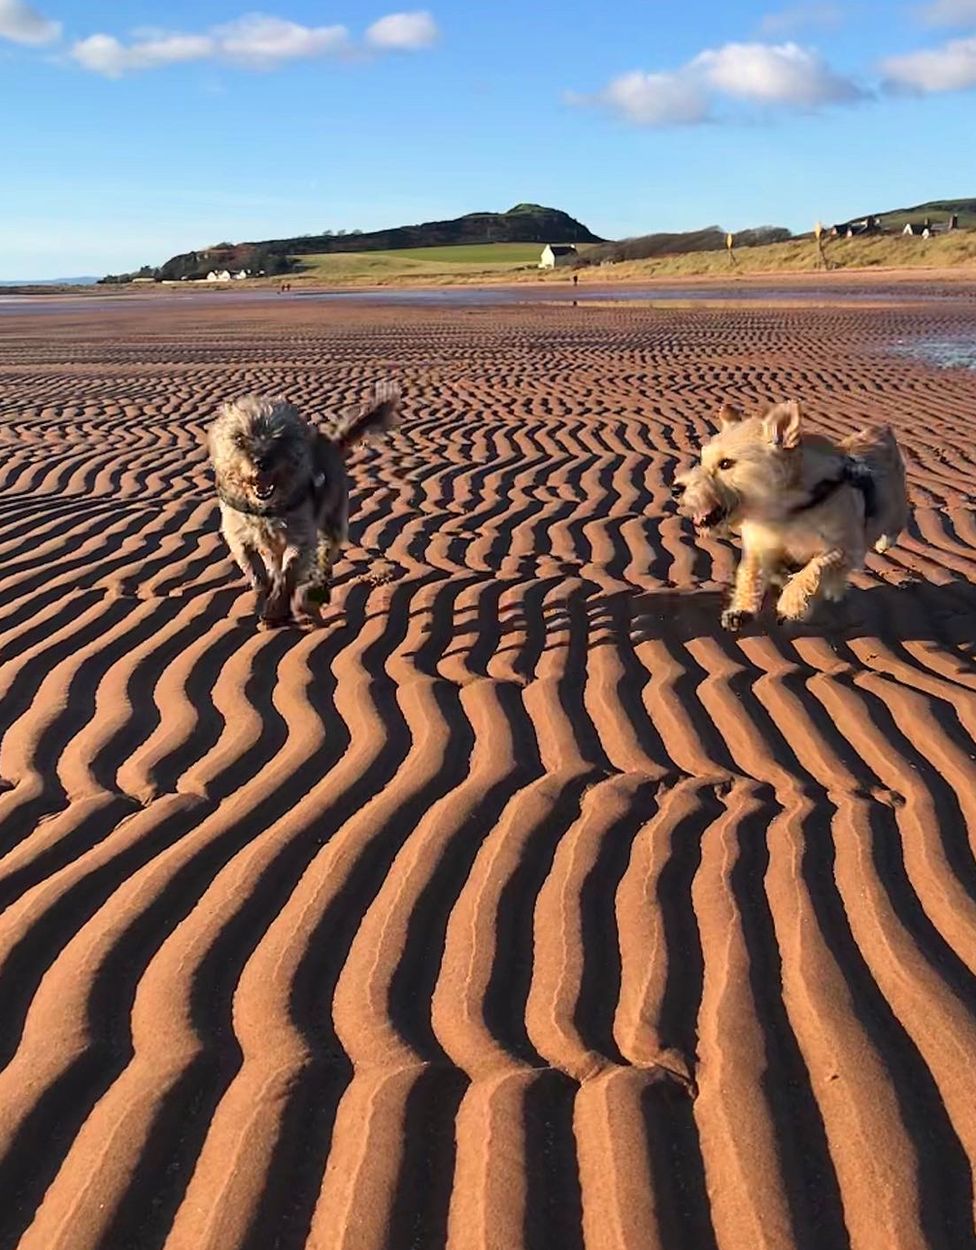 A view of the beach with 2 dogs running across small sand dunes